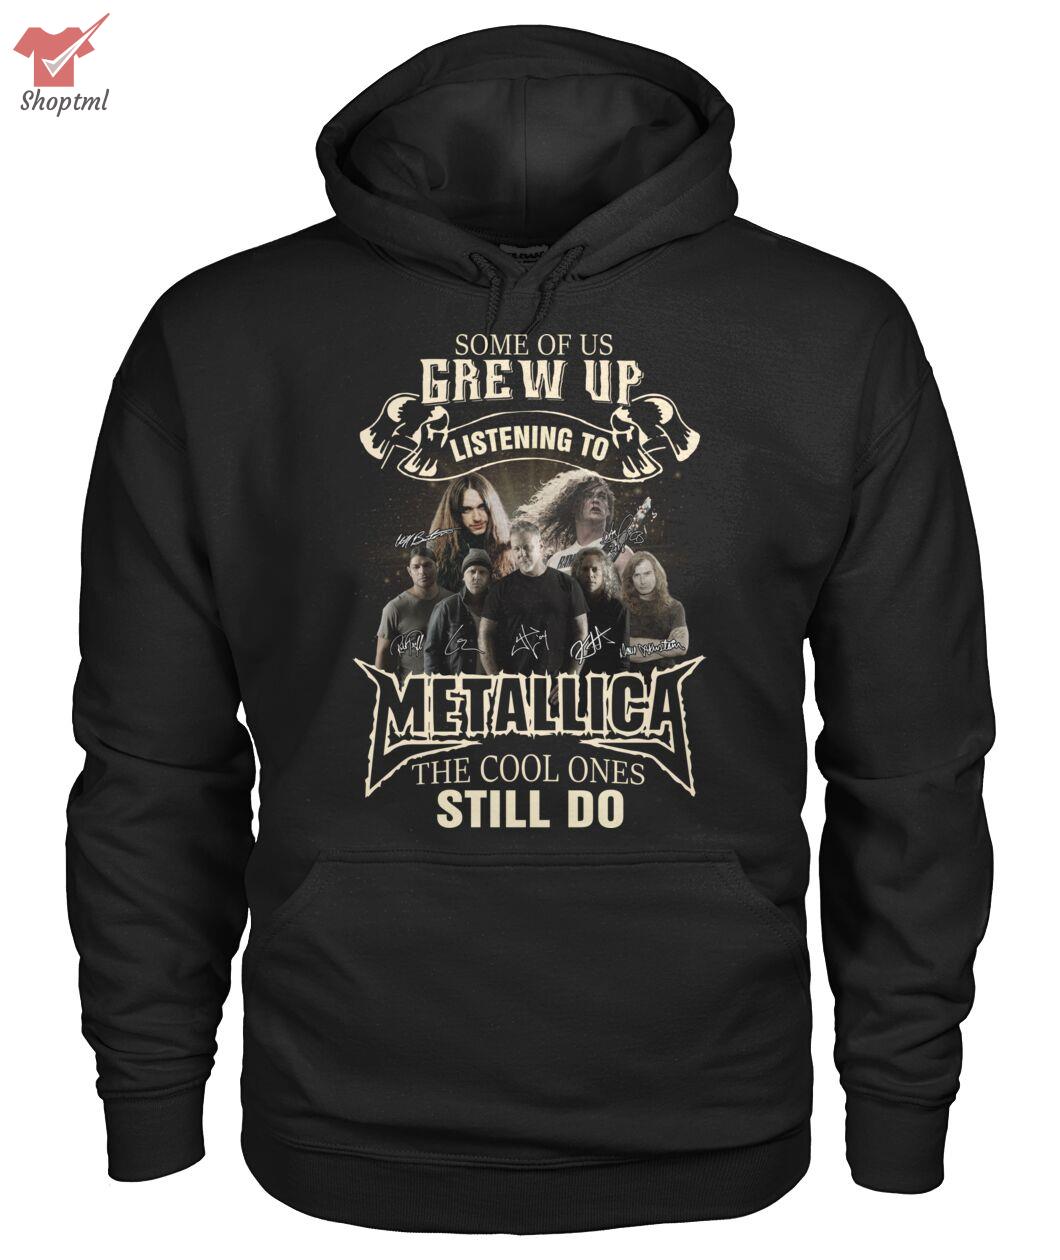 Some Of Us Grew Up Listening To Metallica The Cool Ones Still Do Shirt Hoodie